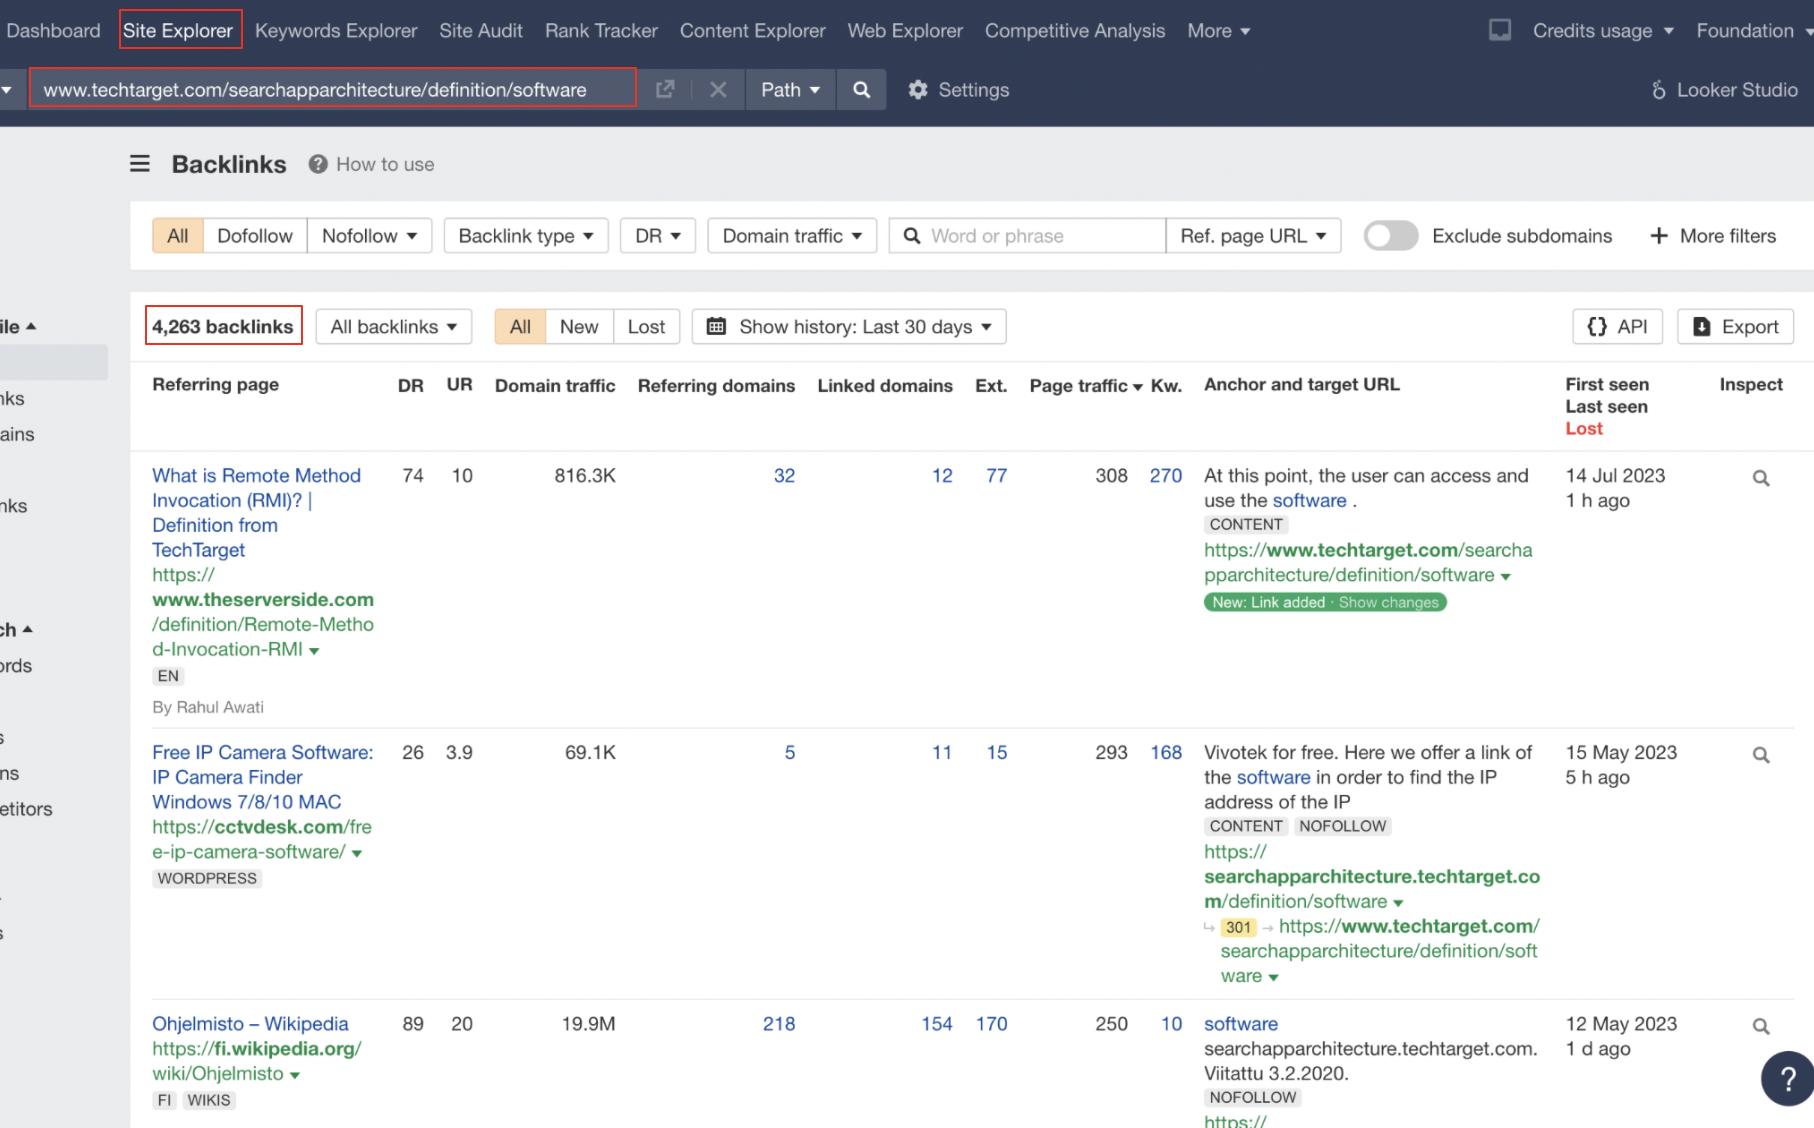 Screenshot of Ahrefs site explorer tool showing the domains linking to competitor pages